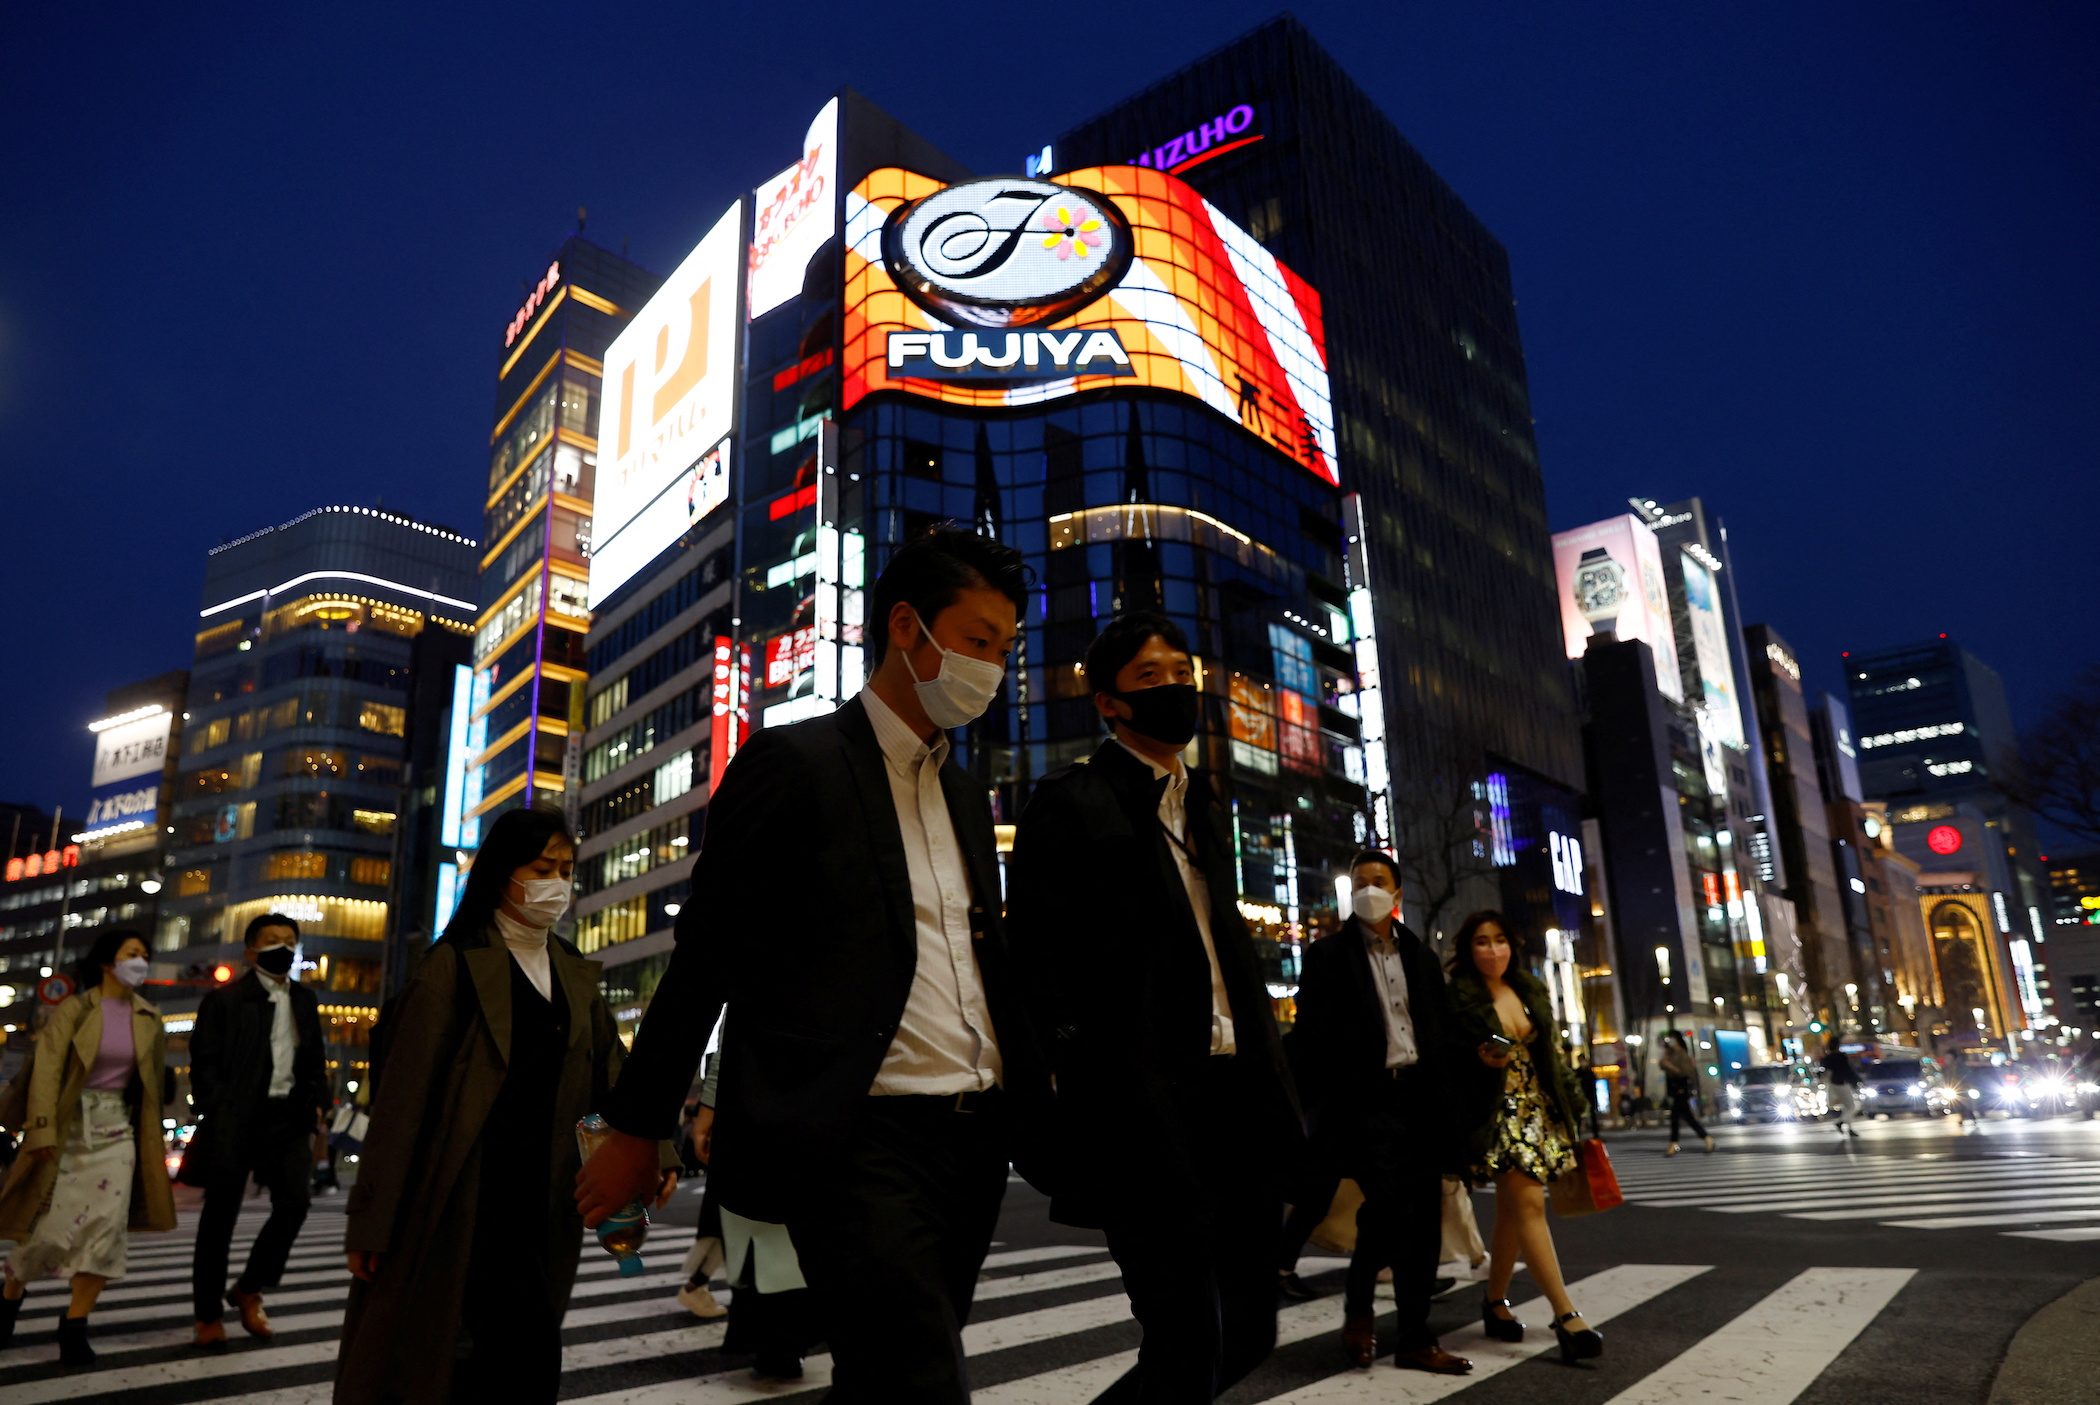 For one Japanese salaryman, nearly a decade of $4 annual pay rises